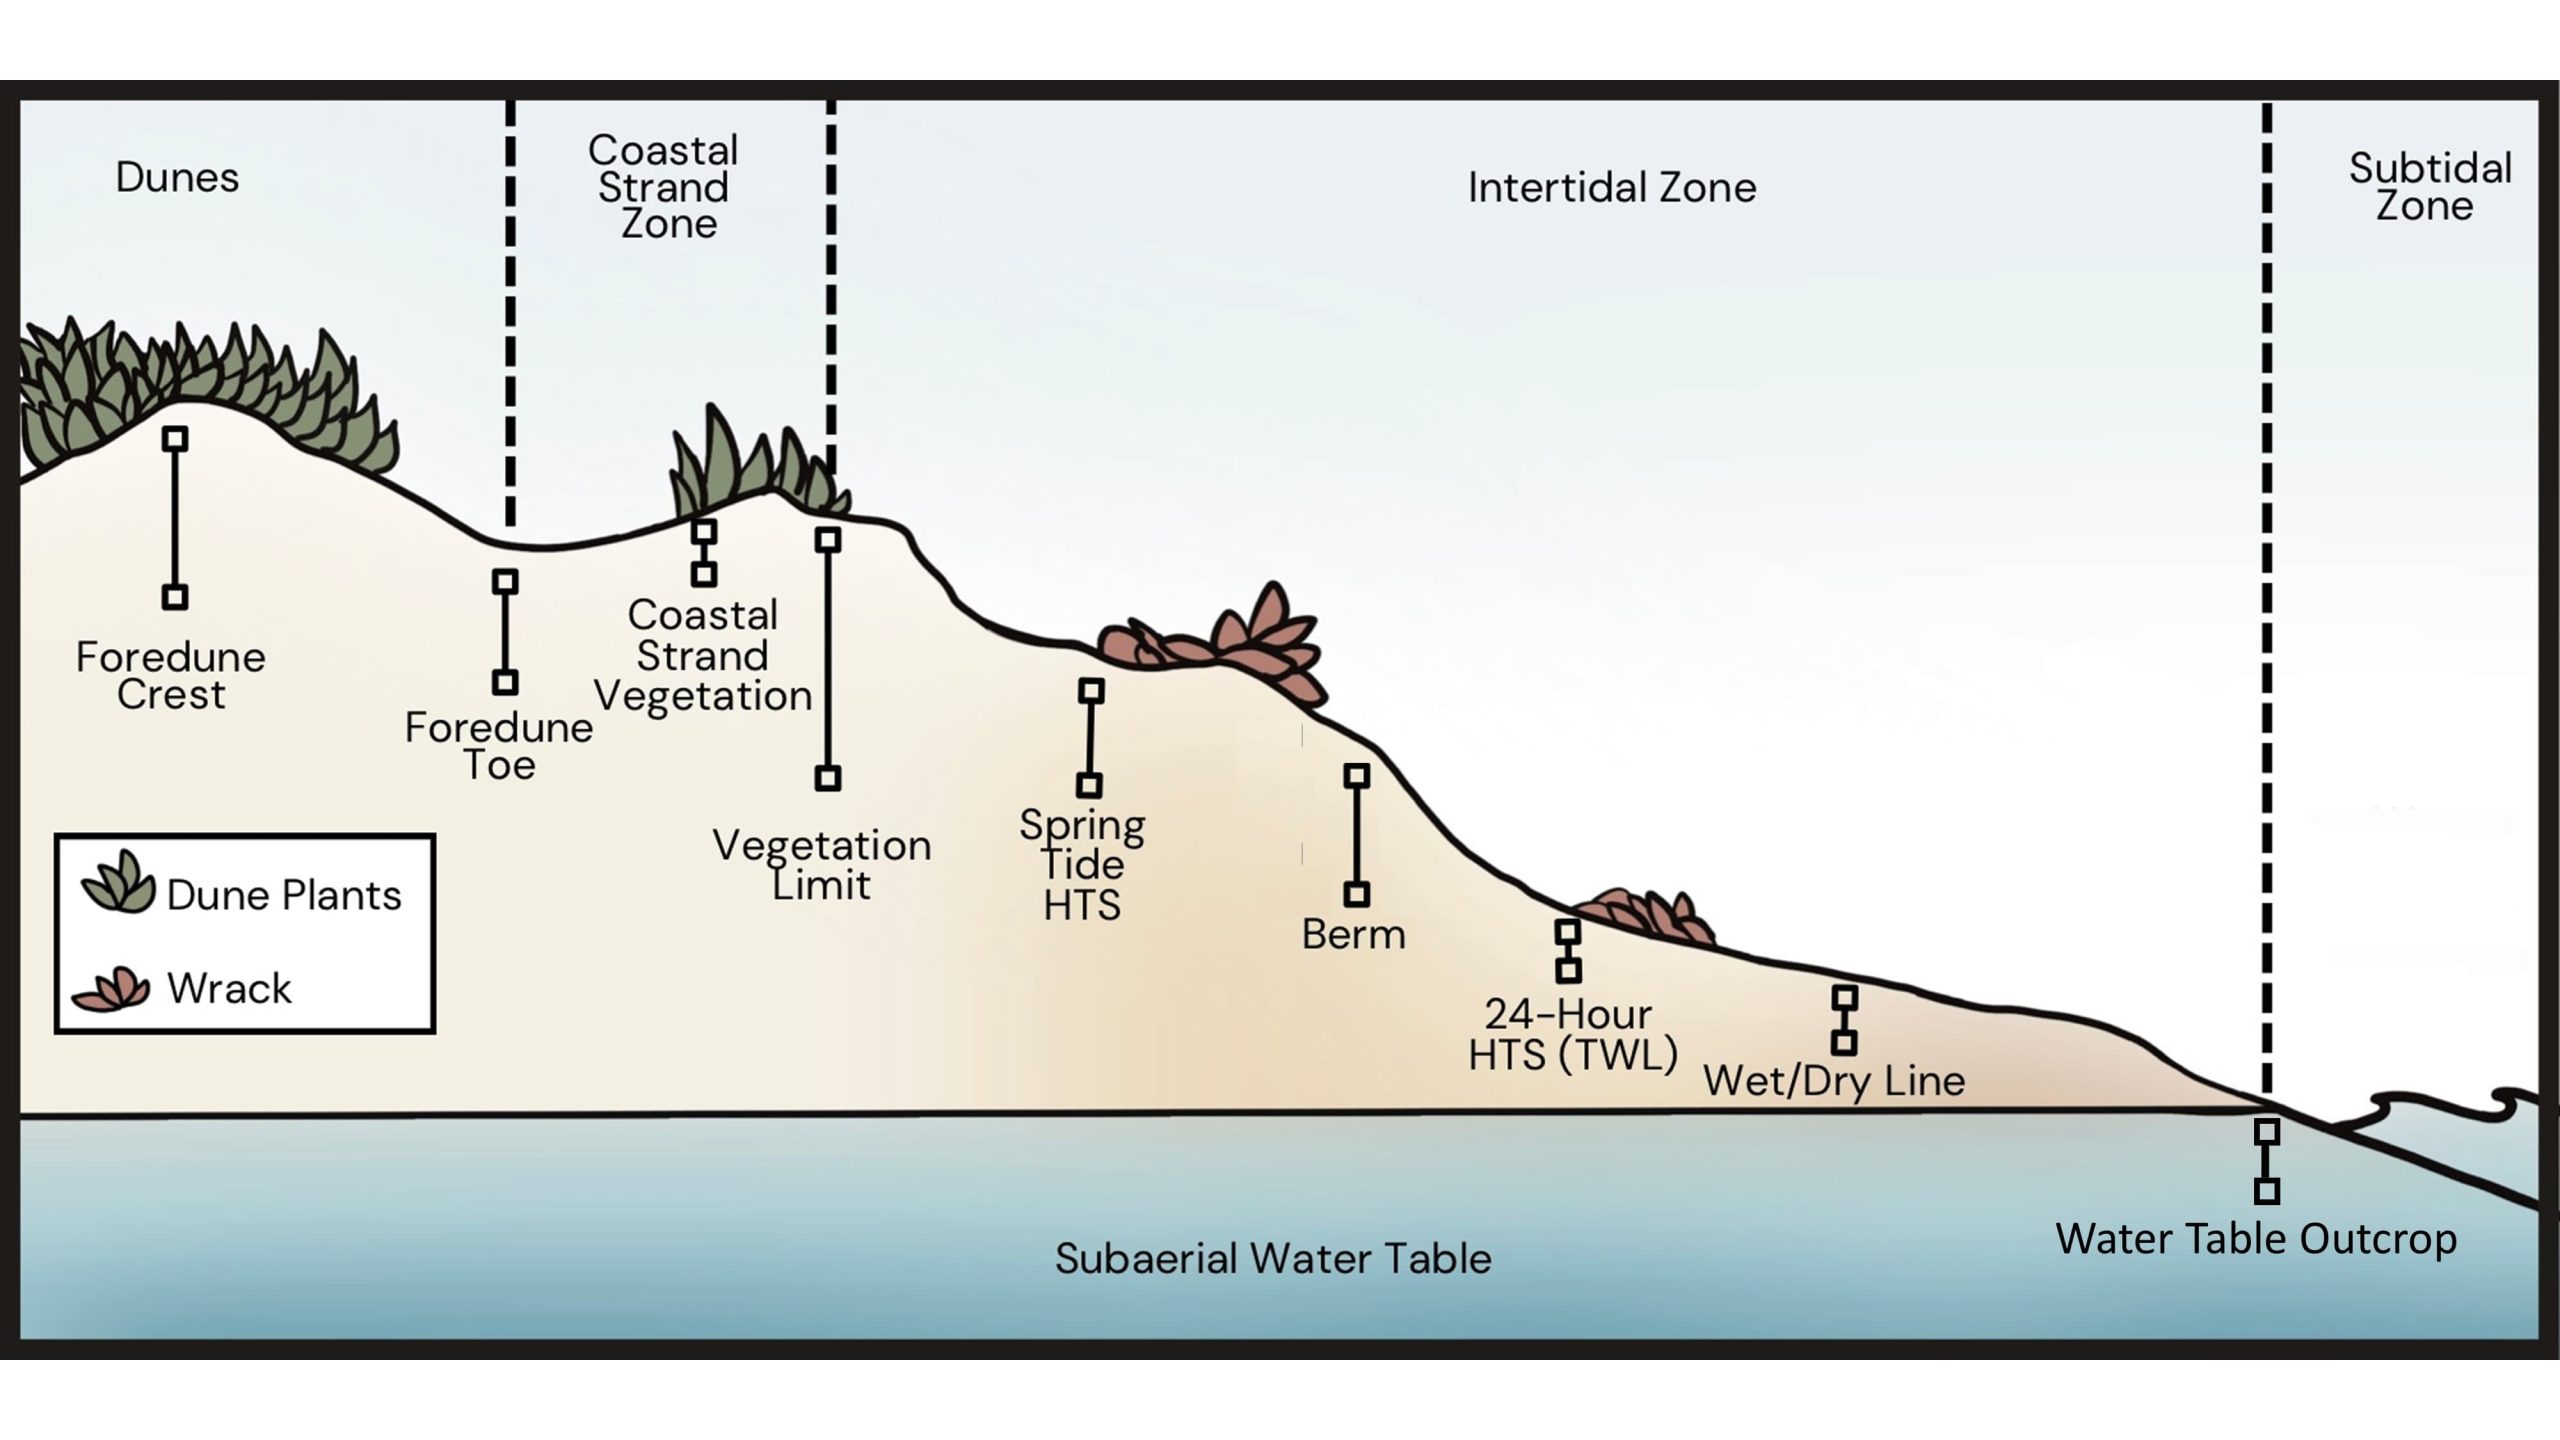 Conceptual figure of geomorphic and ecological features for sea level rise study at California beach and dune sites